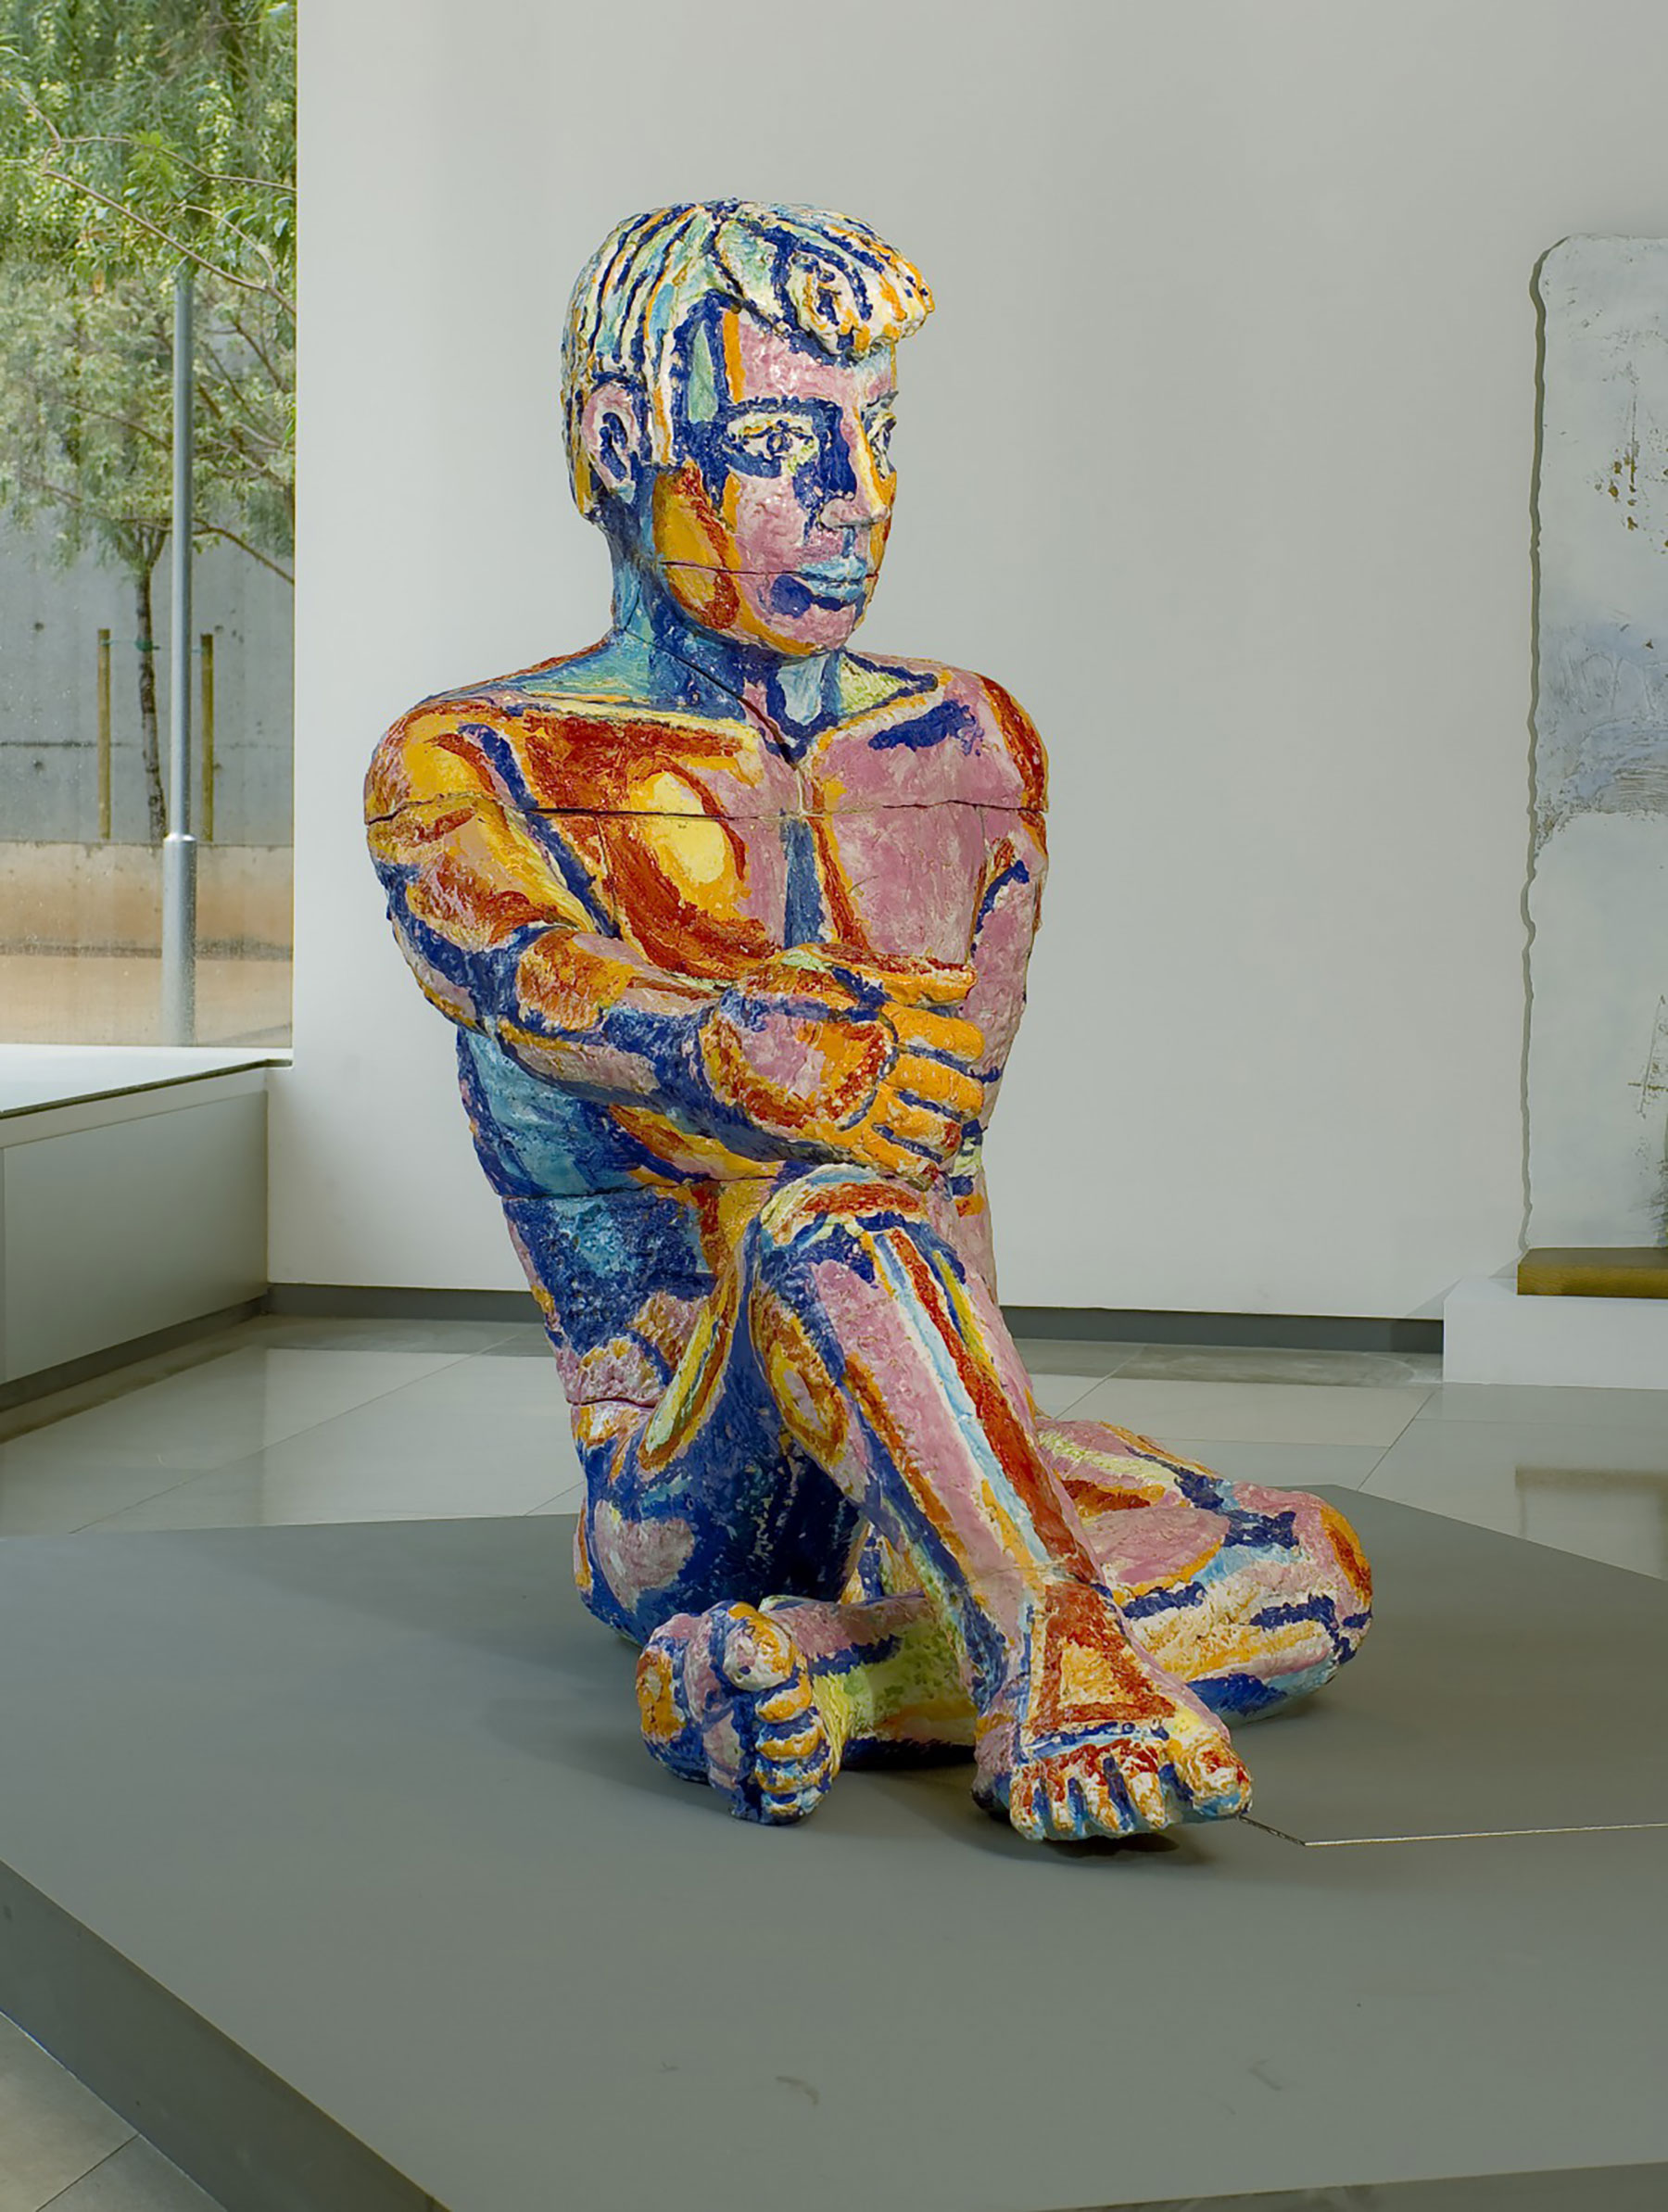 Viola Frey, Nude Man (Hombre desnudo), 1989, glazed ceramic, Gift of Stéphane Janssen in honor of the Museum's 50th Anniversary. © 2020 Artists Rights Society (ARS), New York.